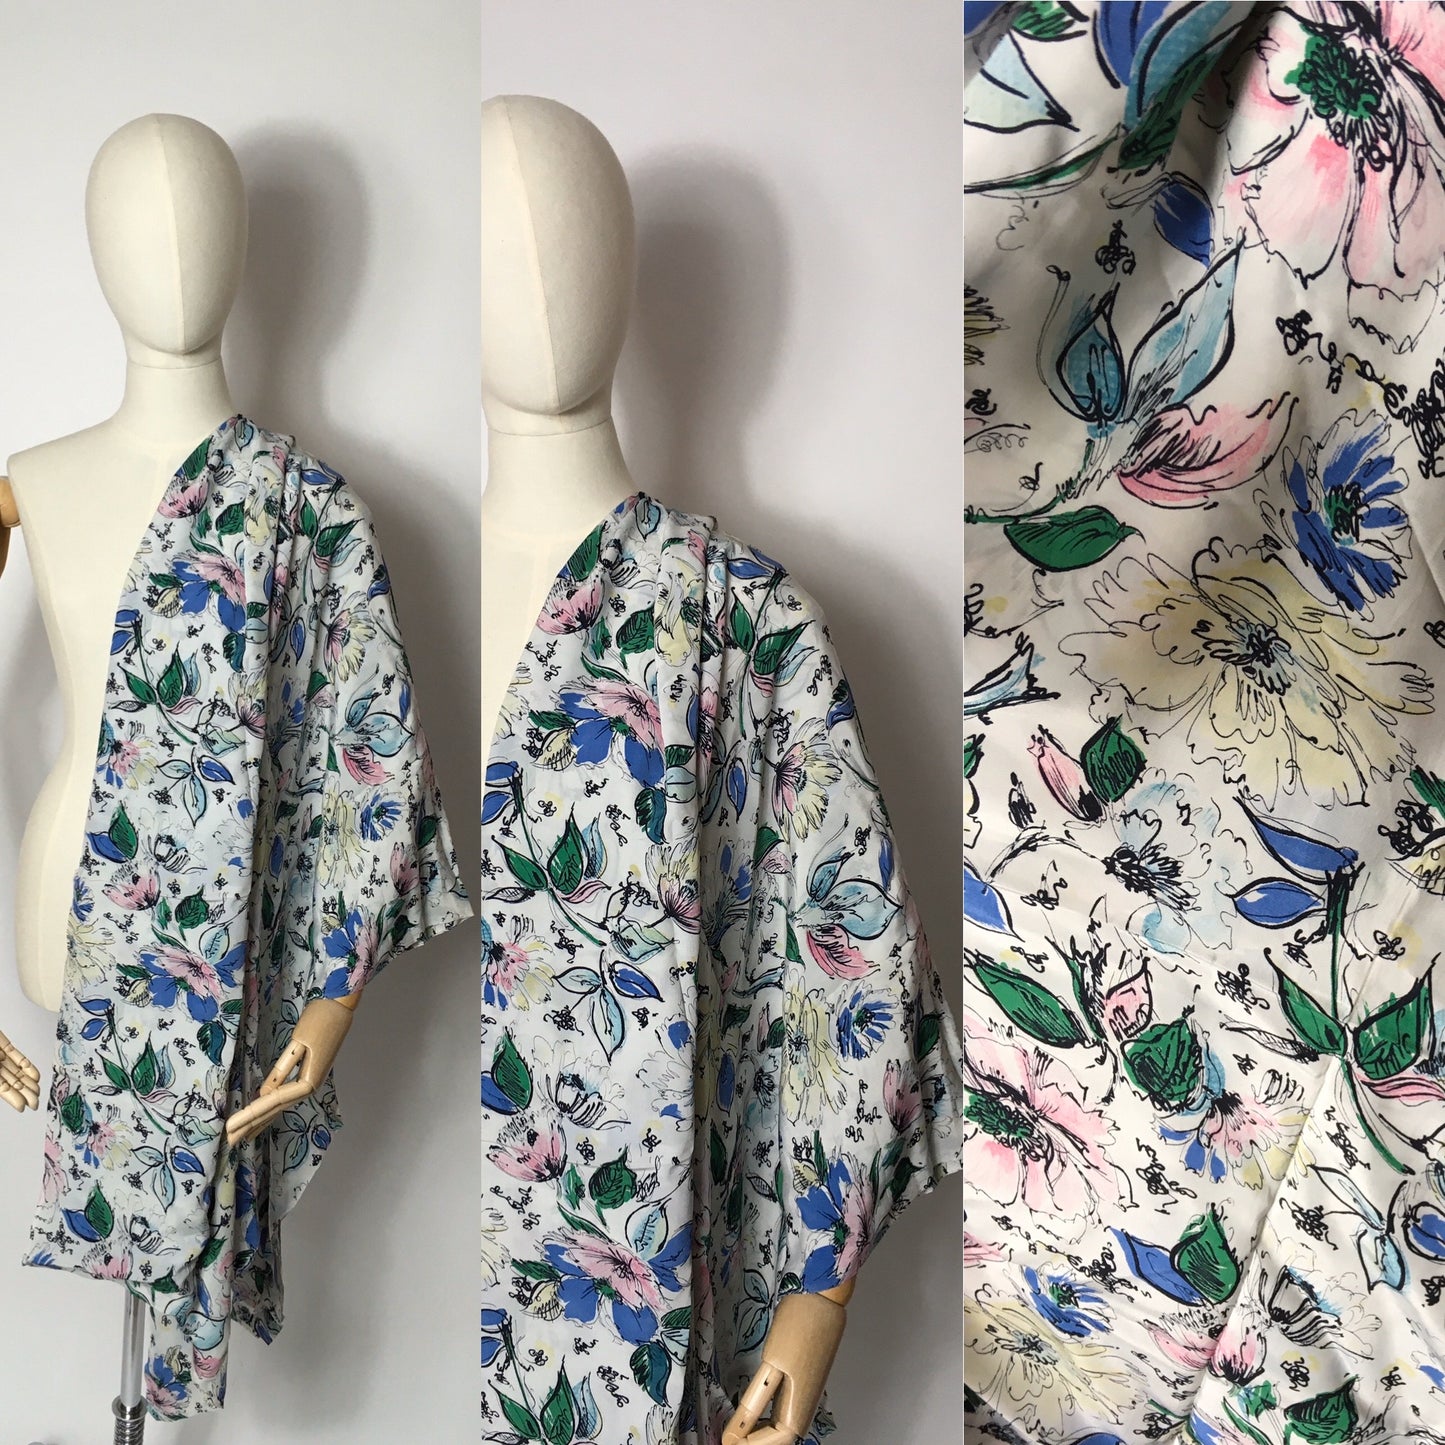 Original 1940’s Semi Sheer Floral Rayon - In a Beautiful Summer Colour Pallet - 3.5m